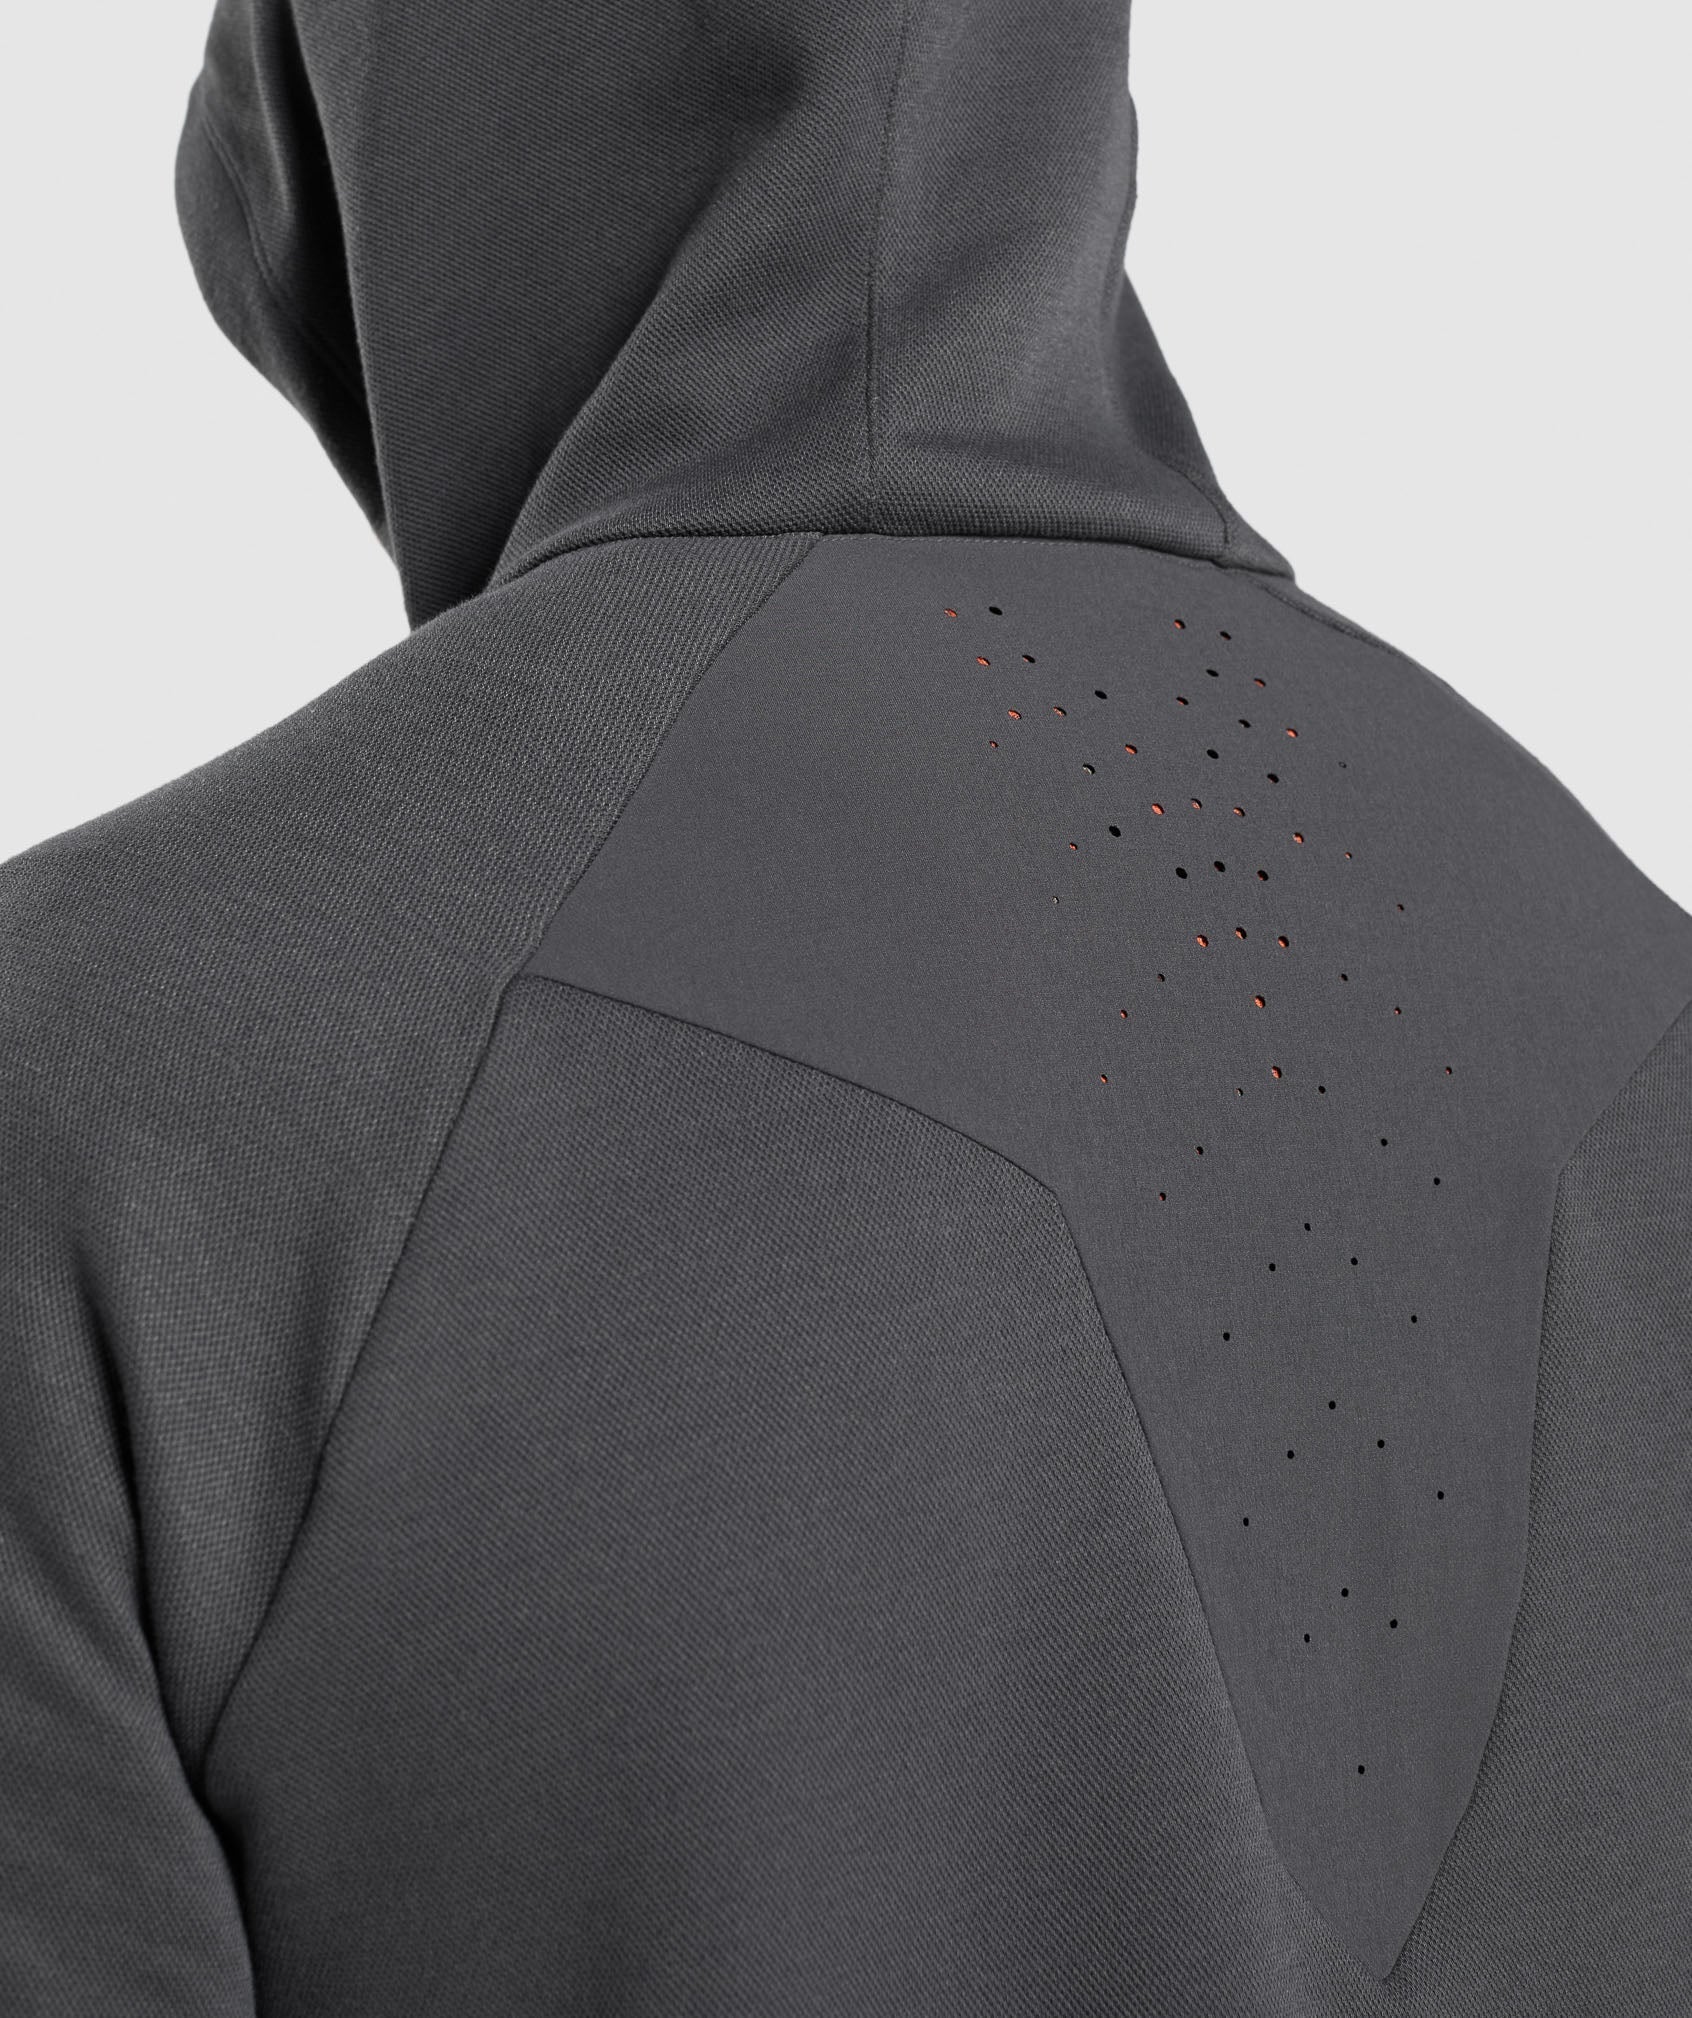 Apex Technical Jacket in Onyx Grey - view 7